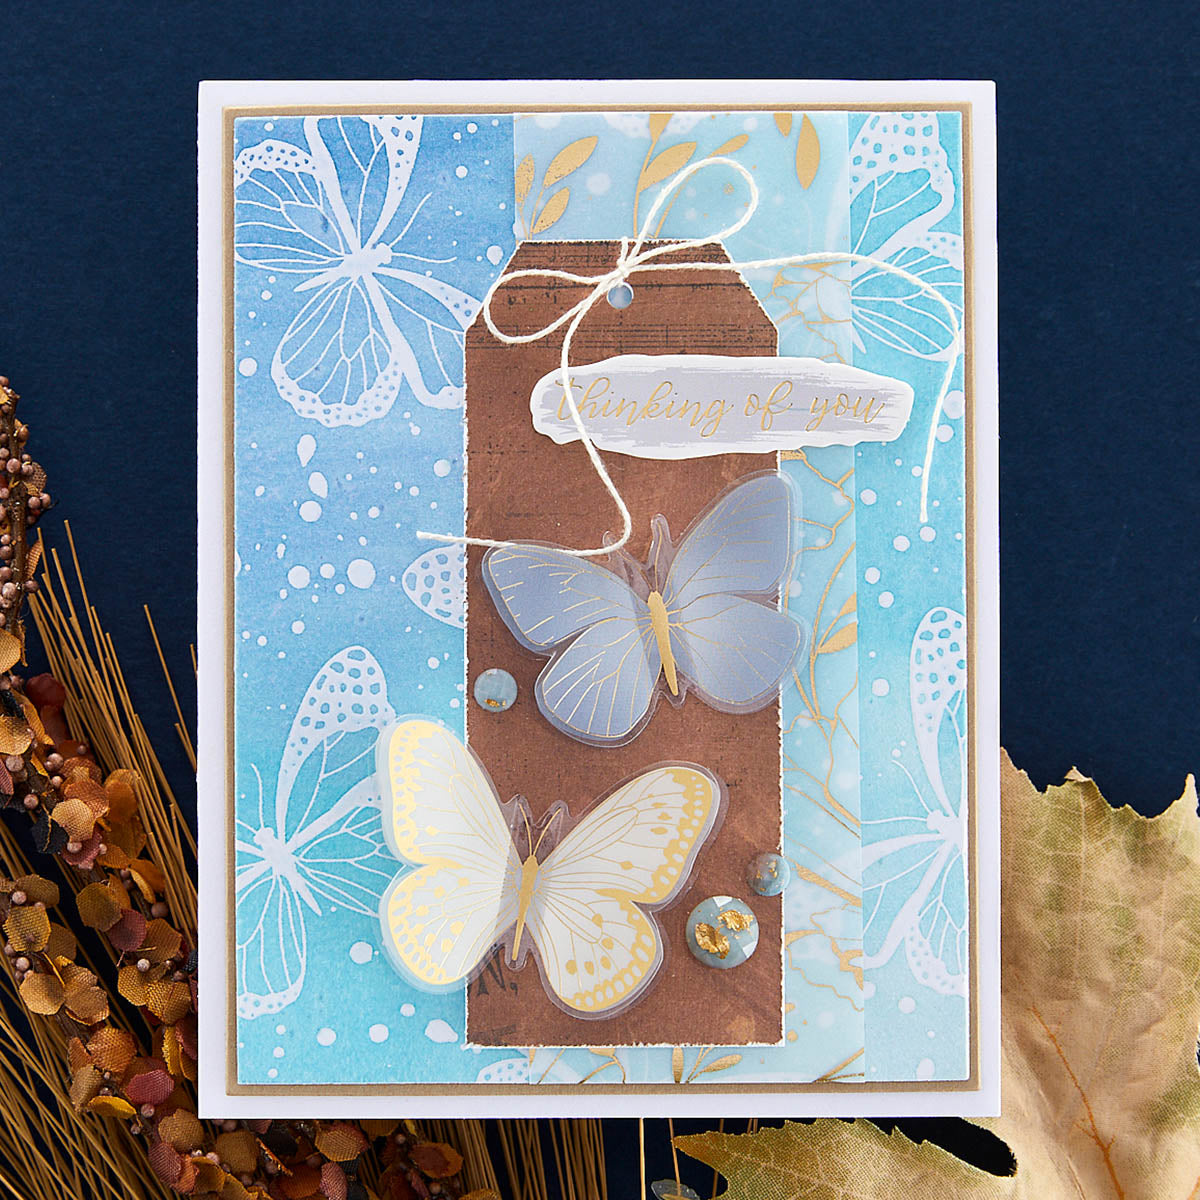 Spellbinders - Water Color Resist 6 x 6" Paper Pad from the Serenade of Autumn Collection